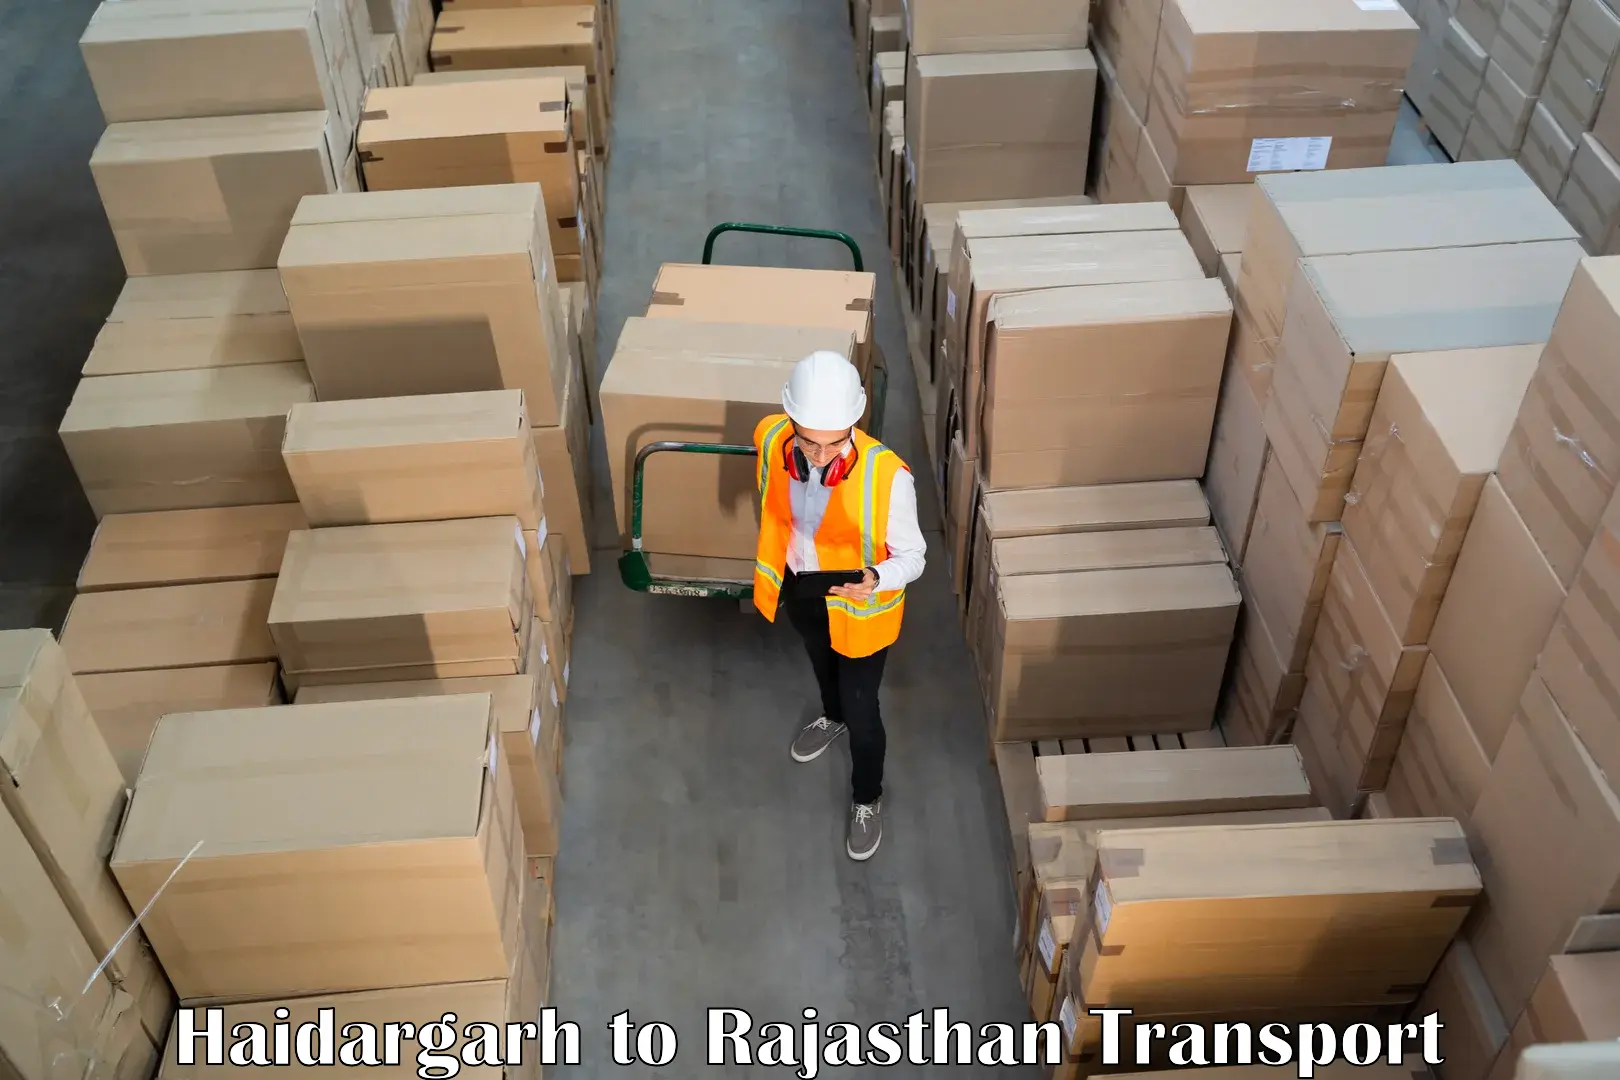 Daily parcel service transport in Haidargarh to Rajsamand